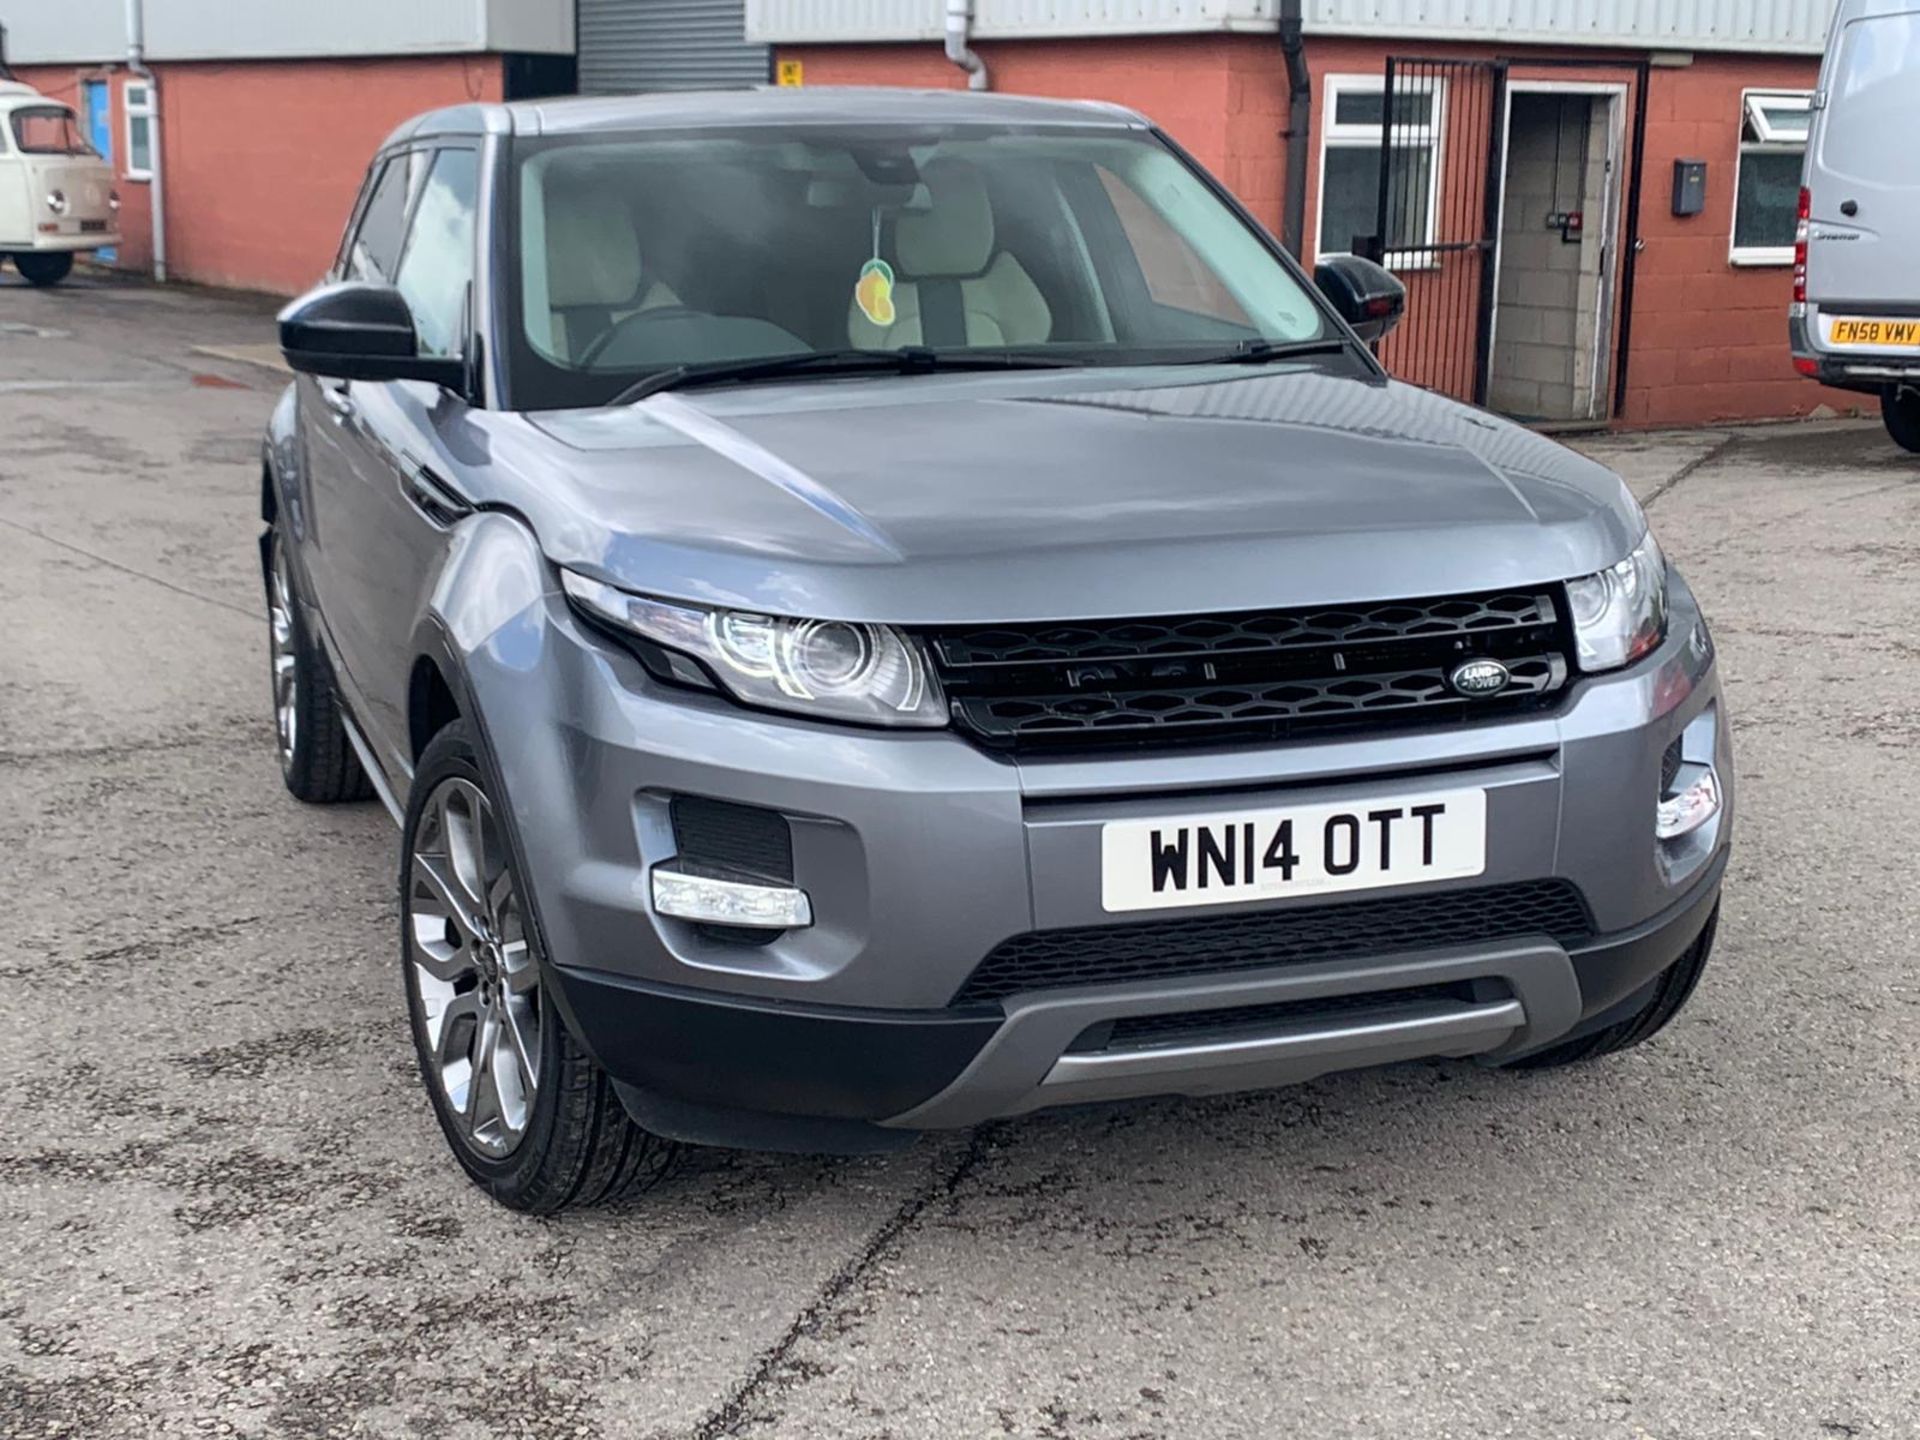 2014/14 REG LAND ROVER RANGE ROVER EVOQUE DYNAMIC S 2.2 DIESEL GREY, SHOWING 2 FORMER KEEPERS